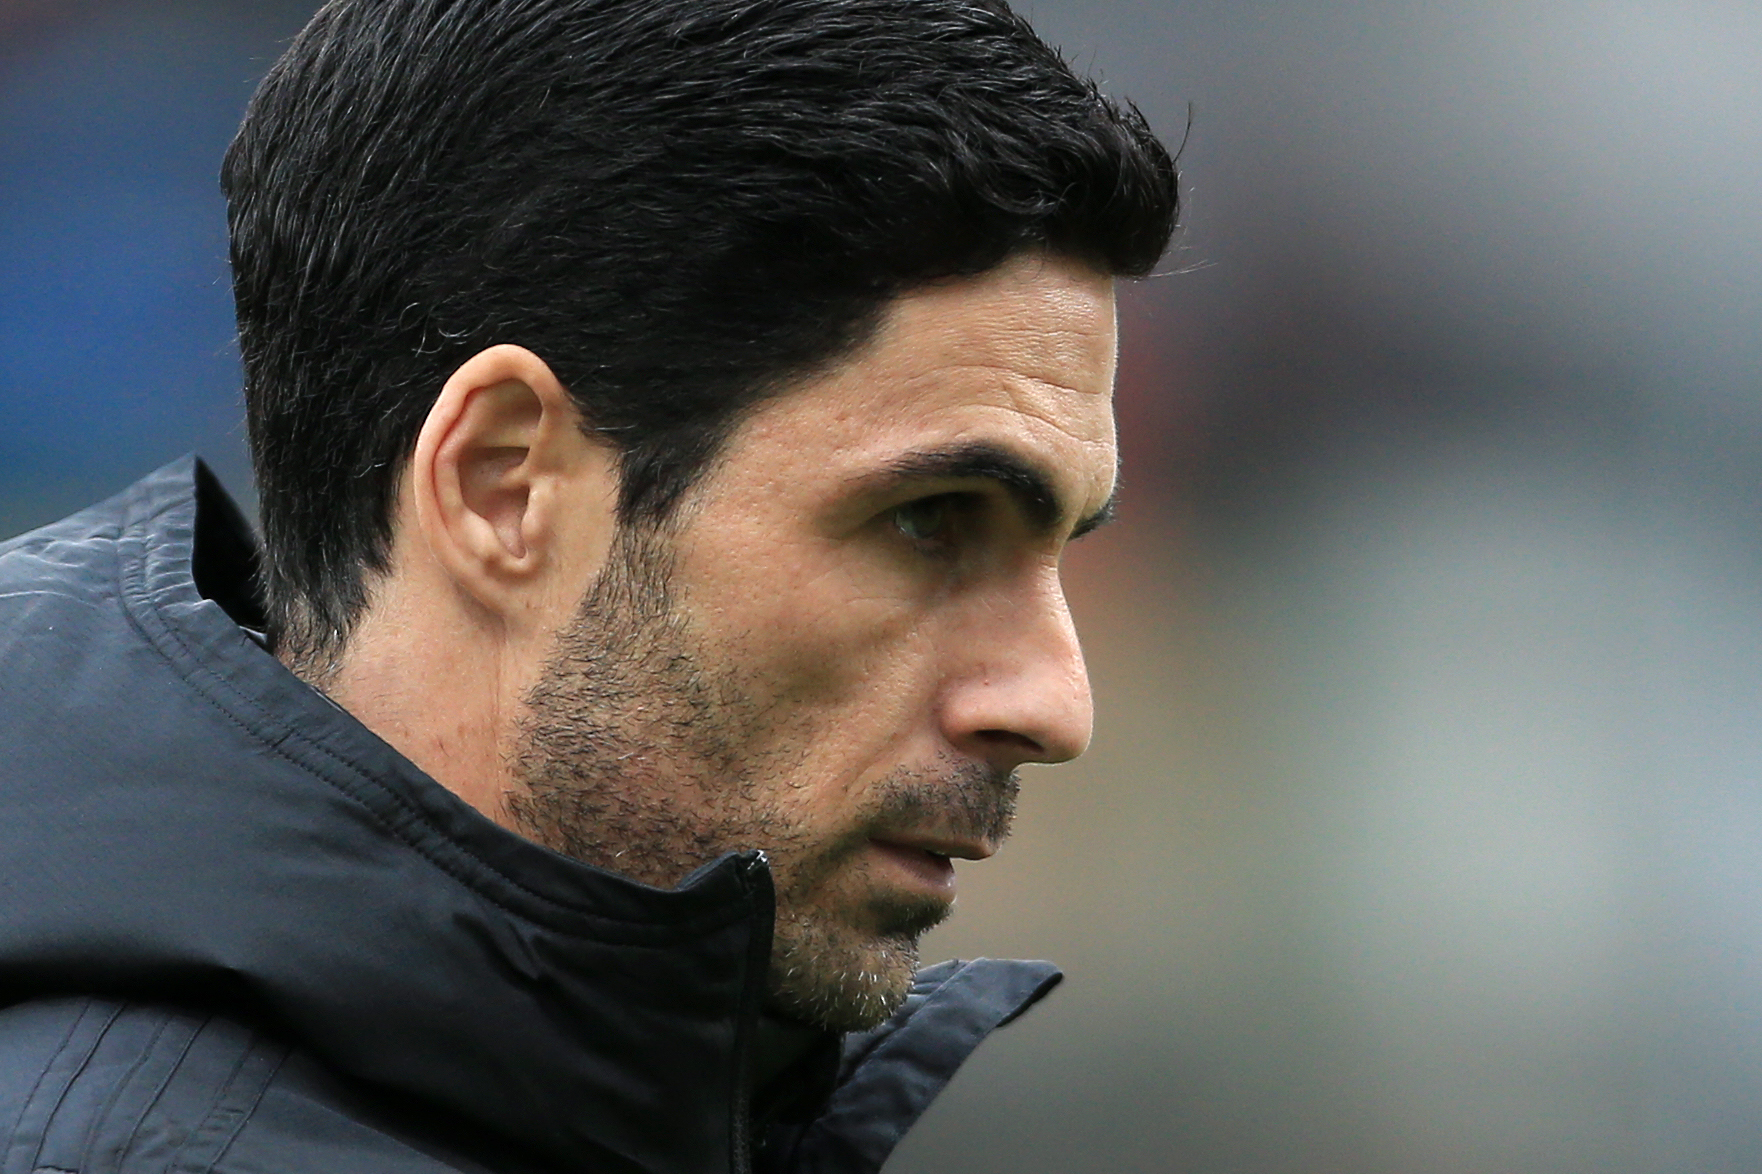 Leeds vs Arsenal: What can we expect from Mikel Arteta’s Gunners for the trip to Elland Road - and the rest of 2020 